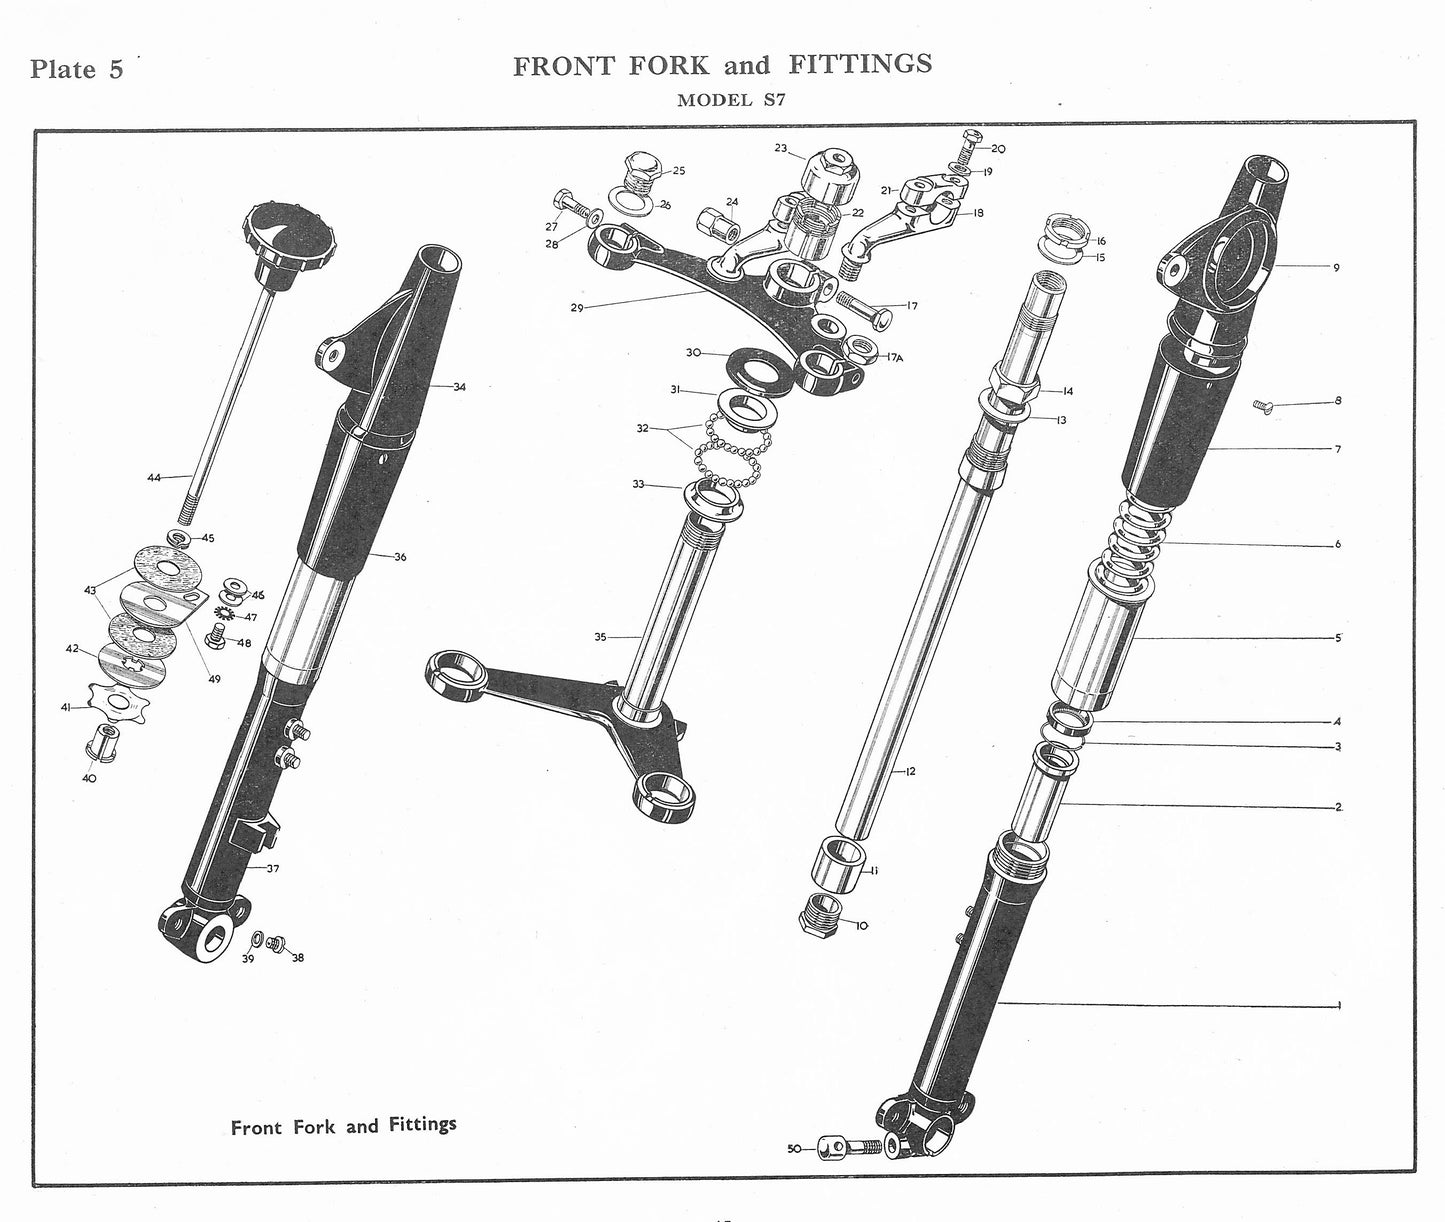 Replacement Drawings for Manual